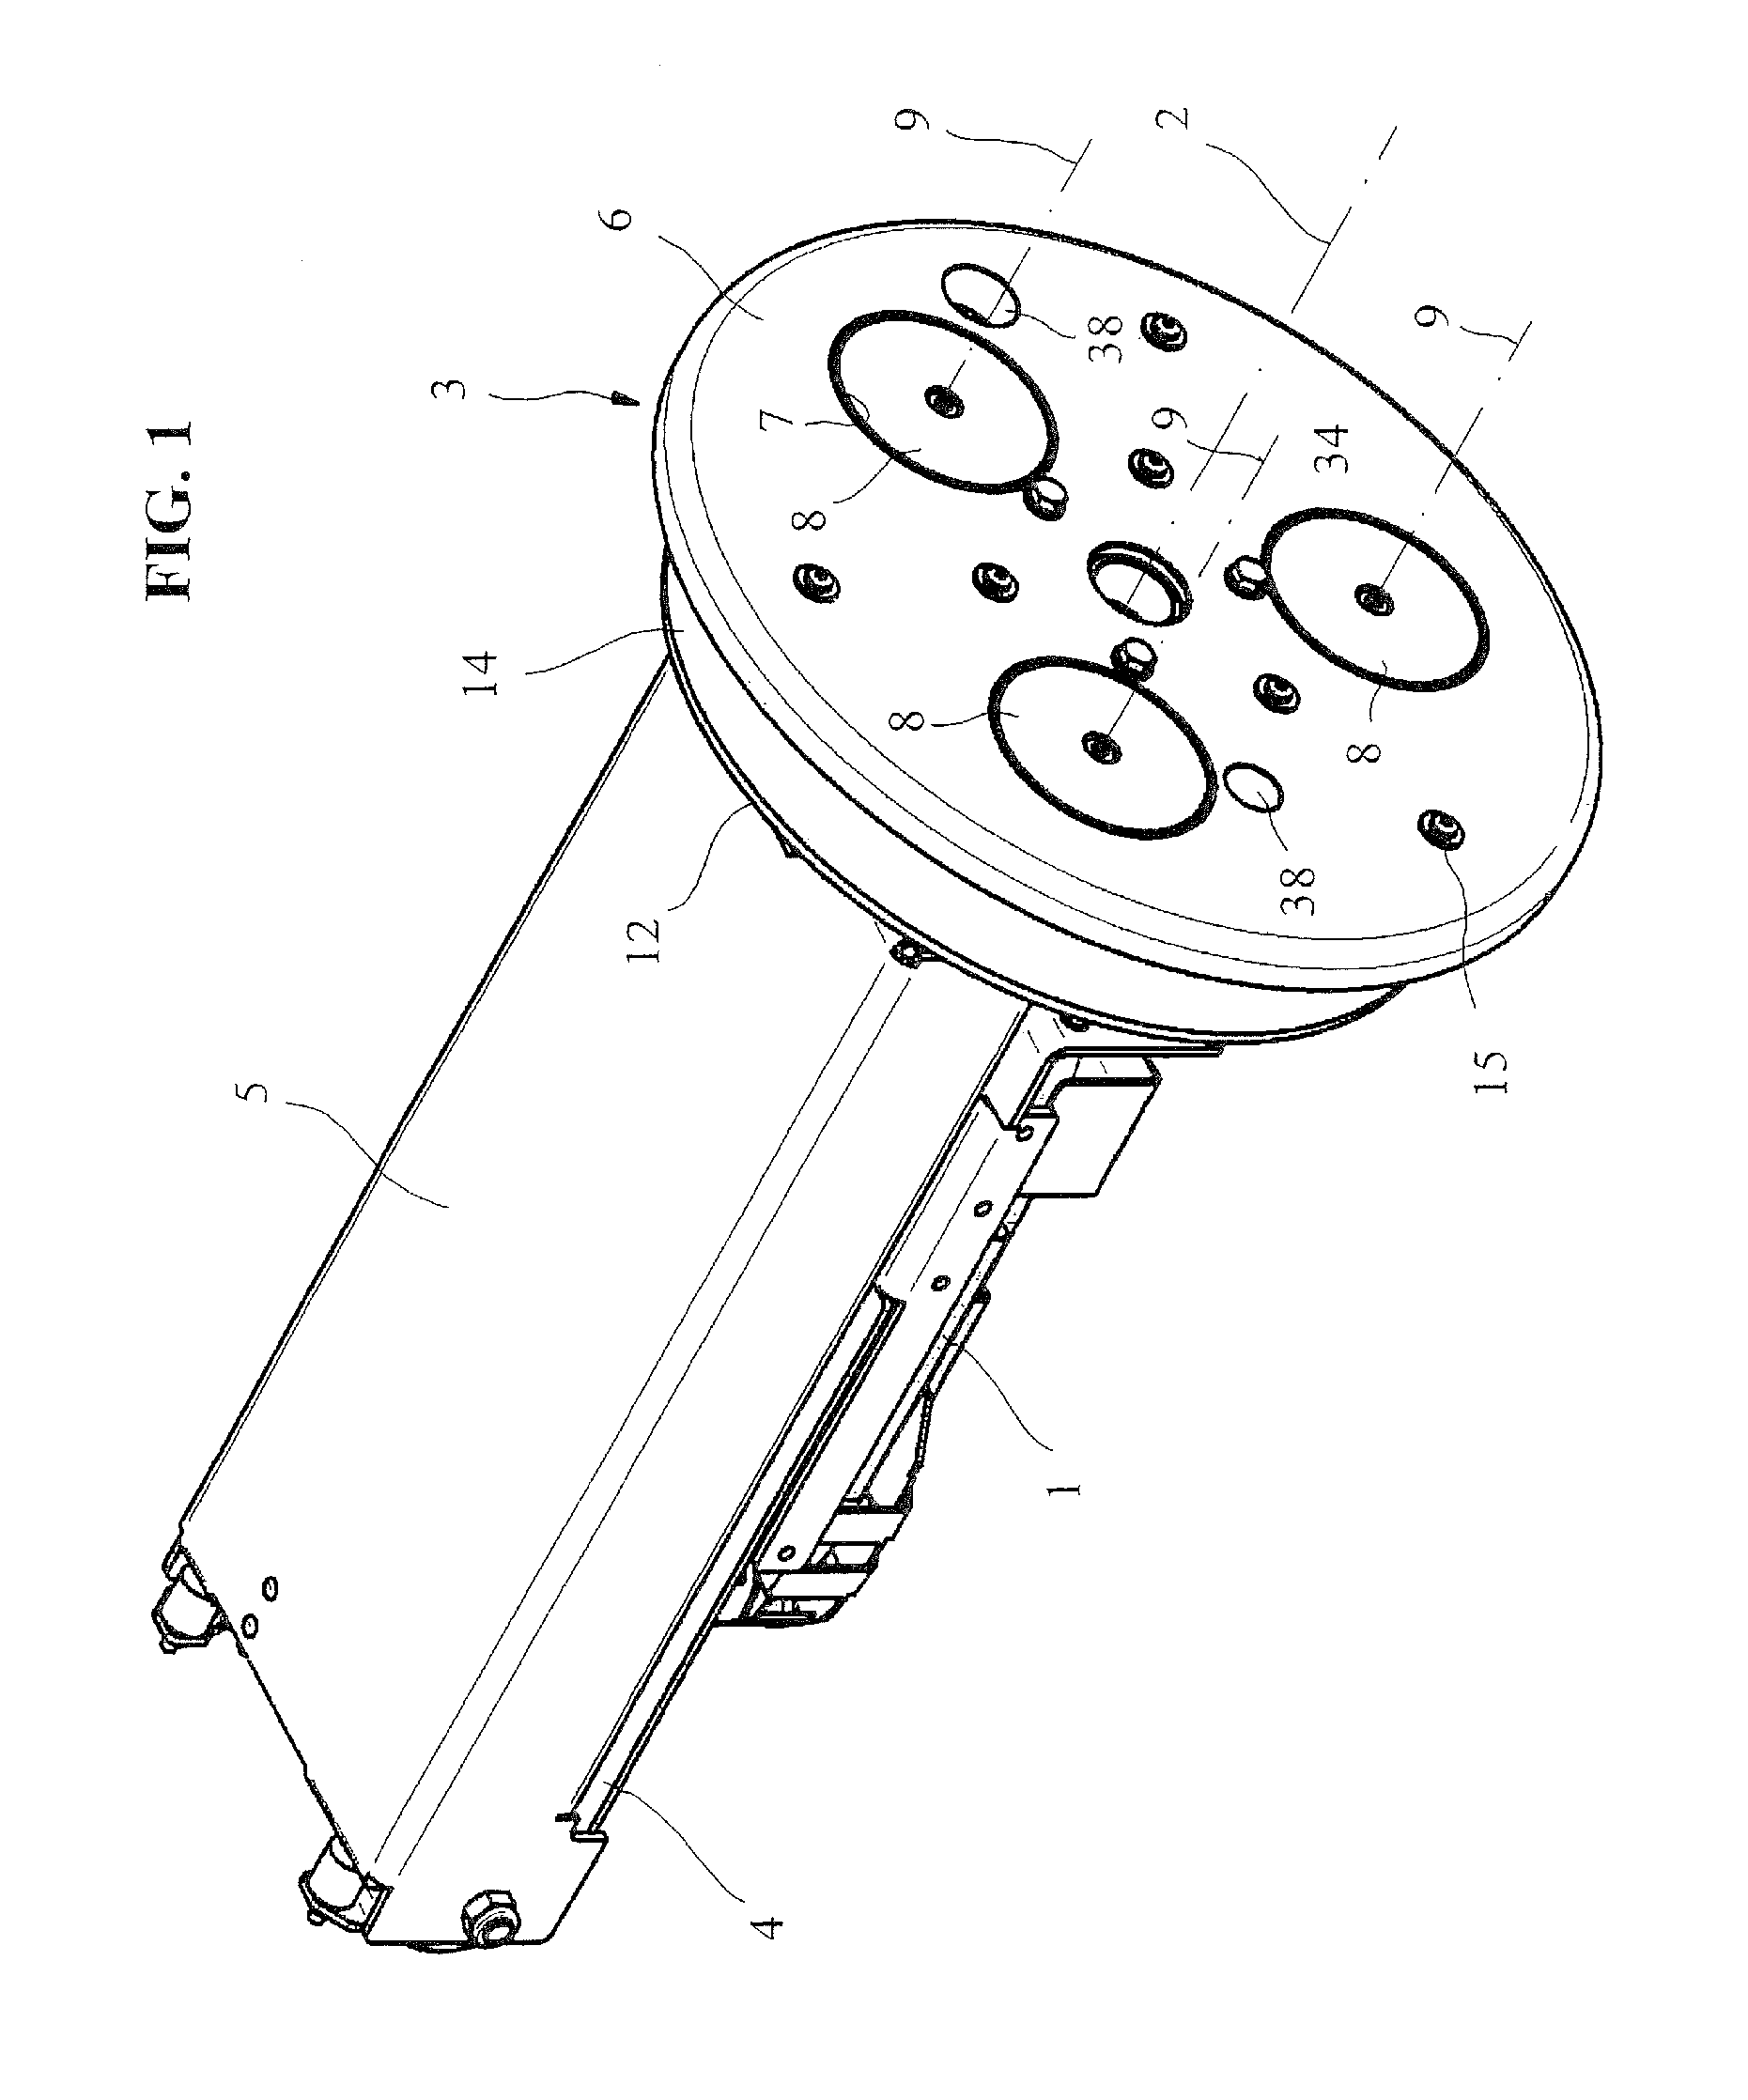 Device for cleaning vehicle wheels